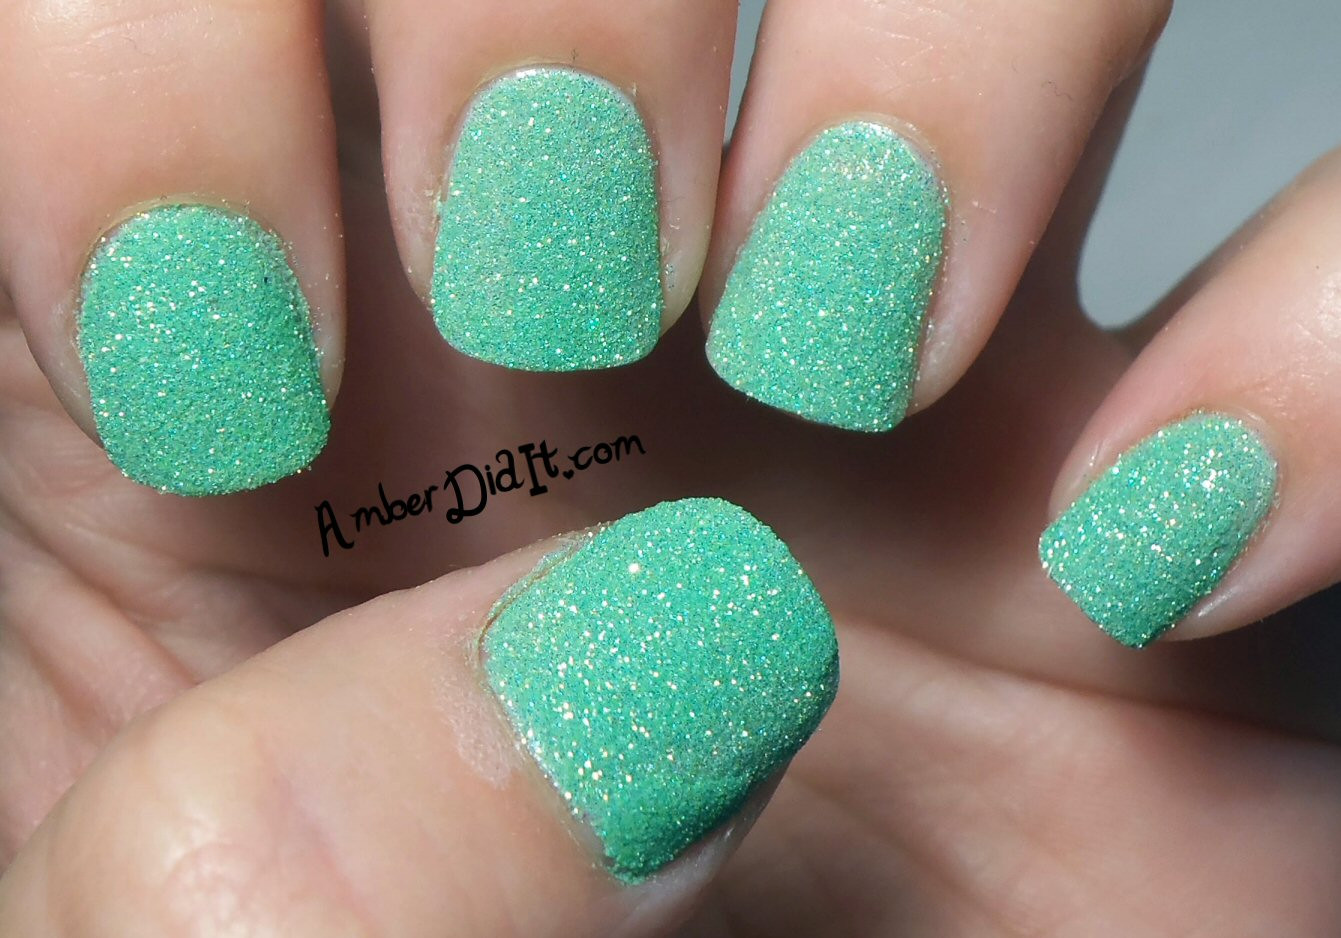 6. Glitter Nail Designs for a Sparkly Look - wide 4